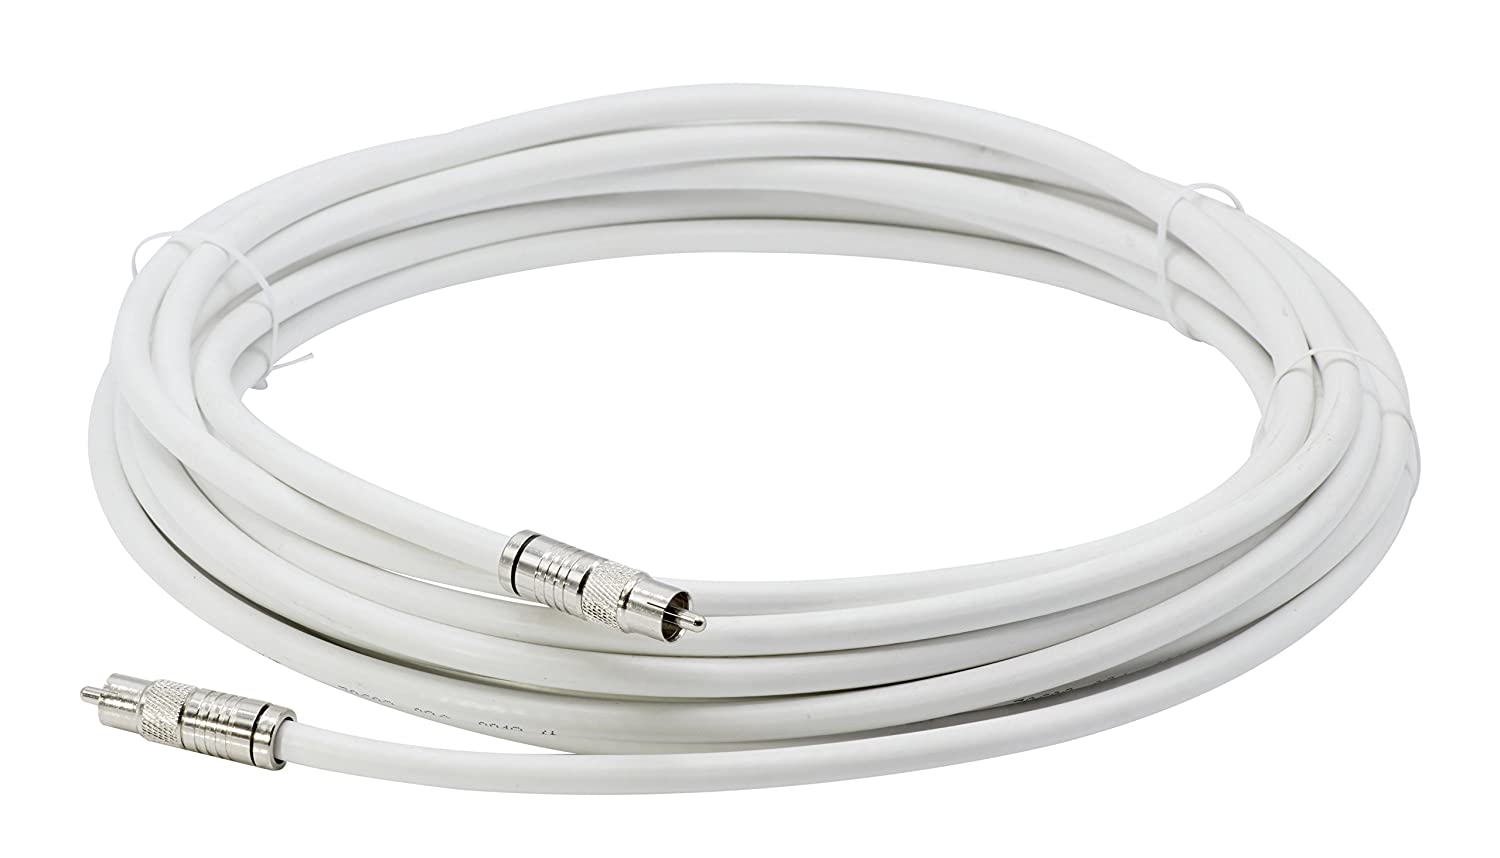 THE CIMPLE CO - Digital Audio Coaxial Cable - Subwoofer Cable - (S/PDIF) RCA Cable, 100 Feet - image 1 of 6